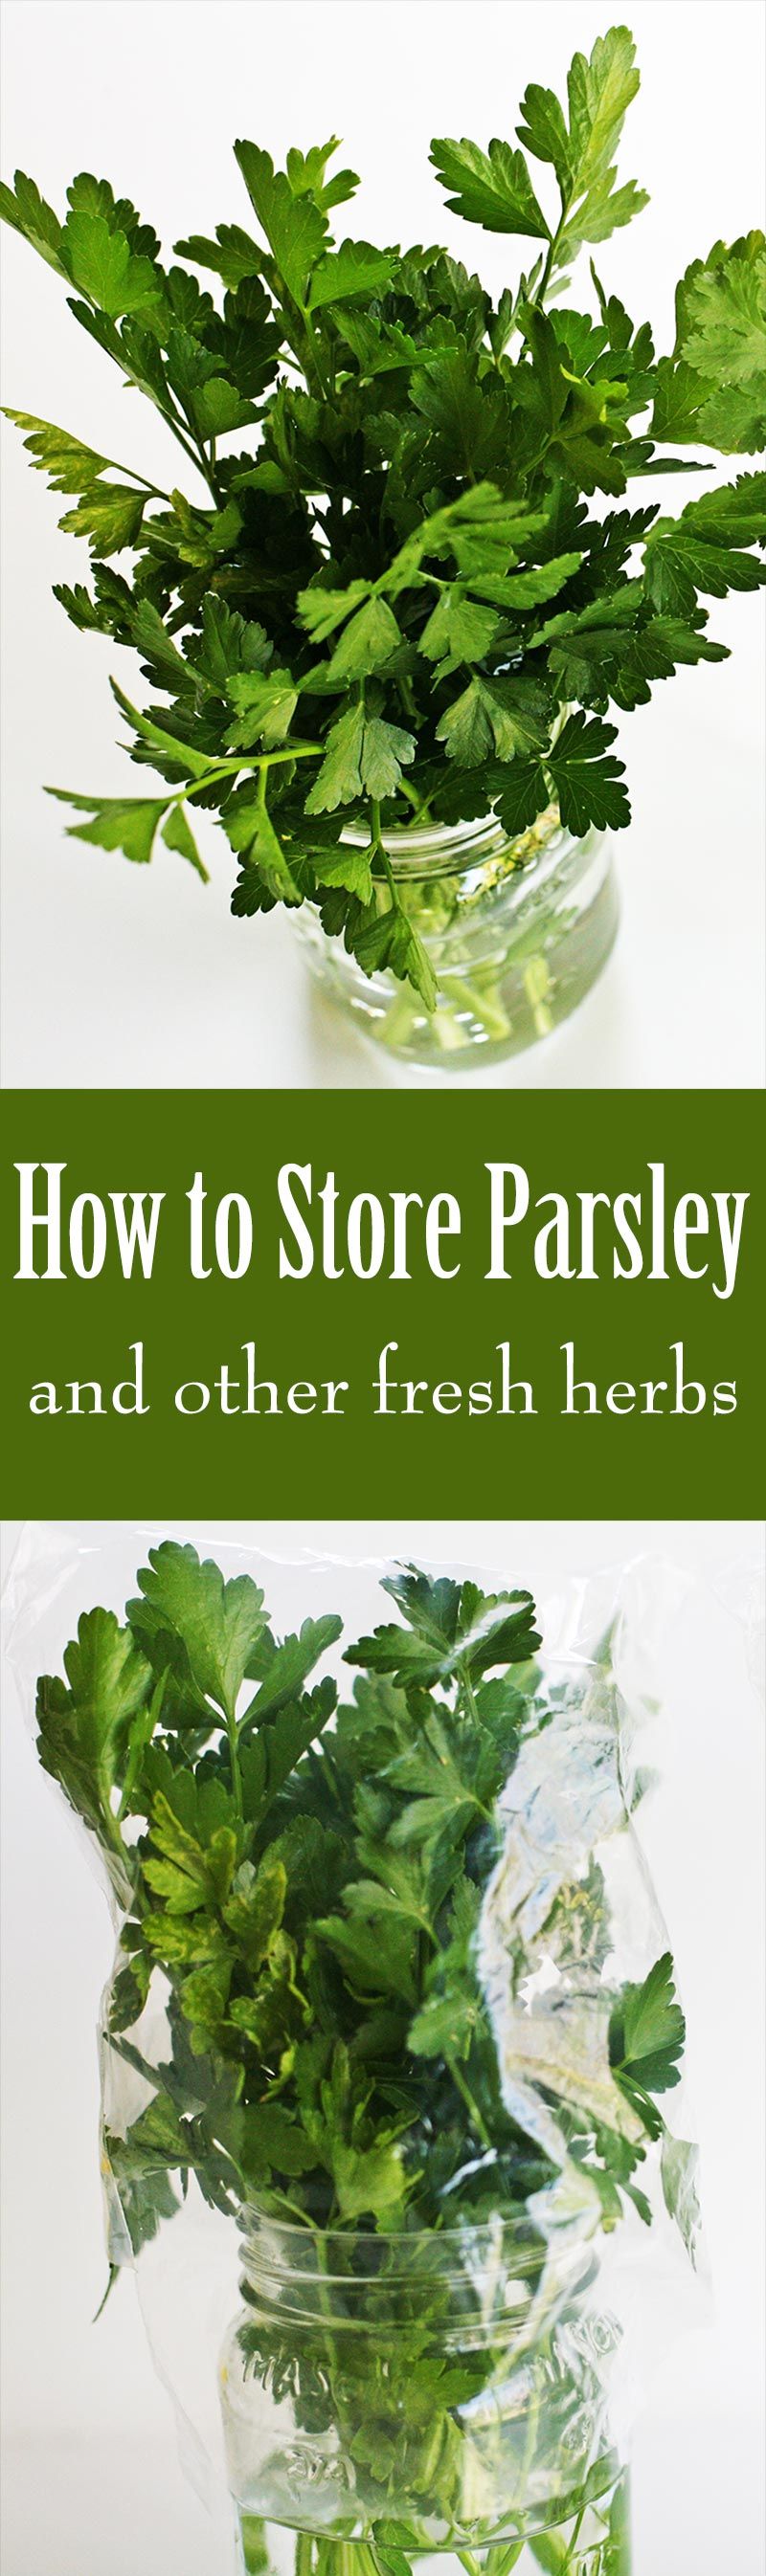 How to Store Parsley, Cilantro, and Other Fresh Herbs ~ Have you ...